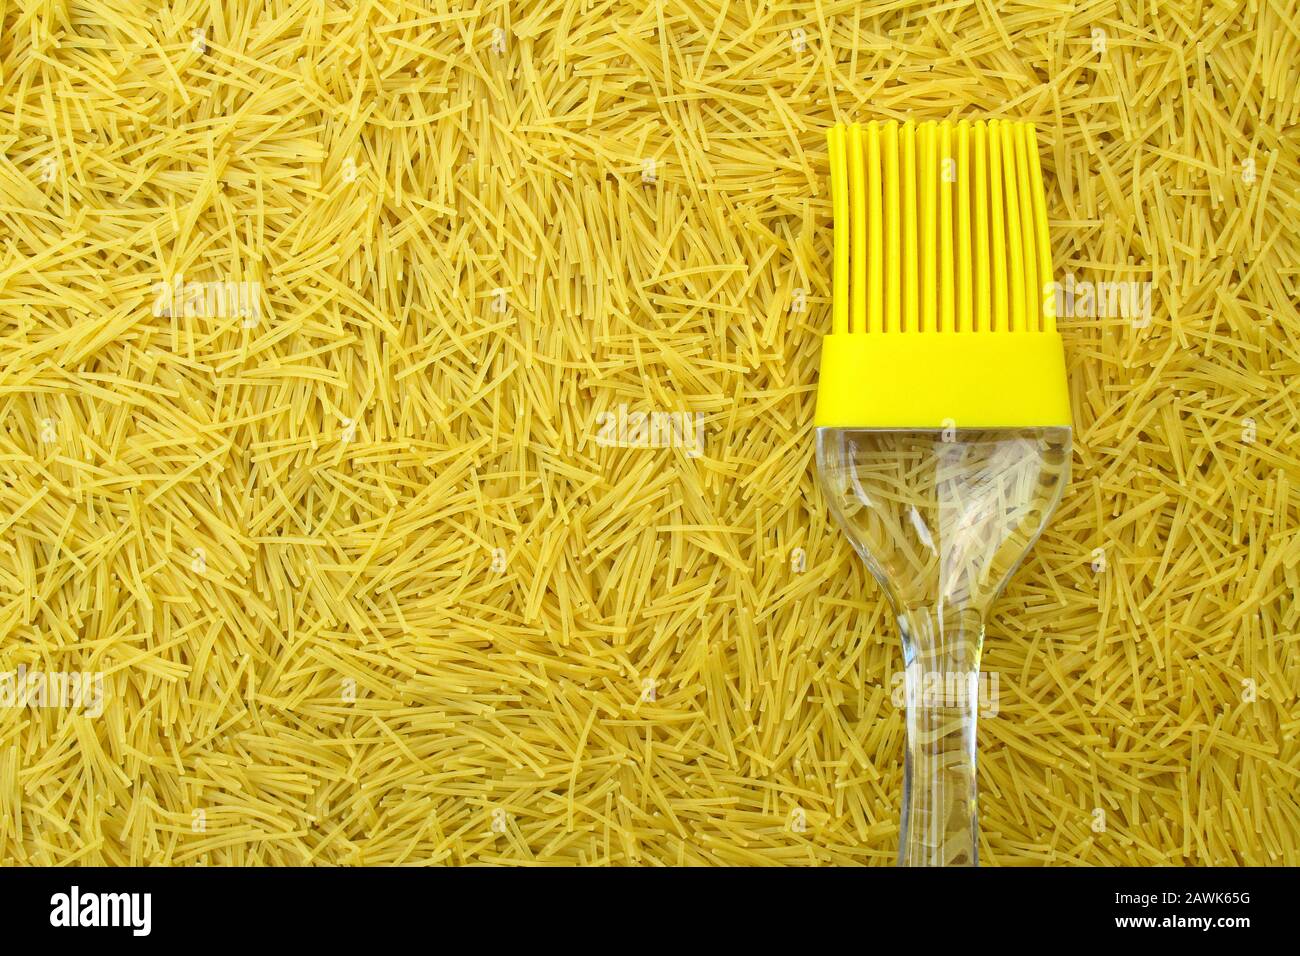 https://c8.alamy.com/comp/2AWK65G/background-with-italian-pasta-vermicelli-and-yellow-silicone-kitchen-brush-or-tassel-with-transparent-handle-copy-space-for-text-and-design-menus-or-2AWK65G.jpg